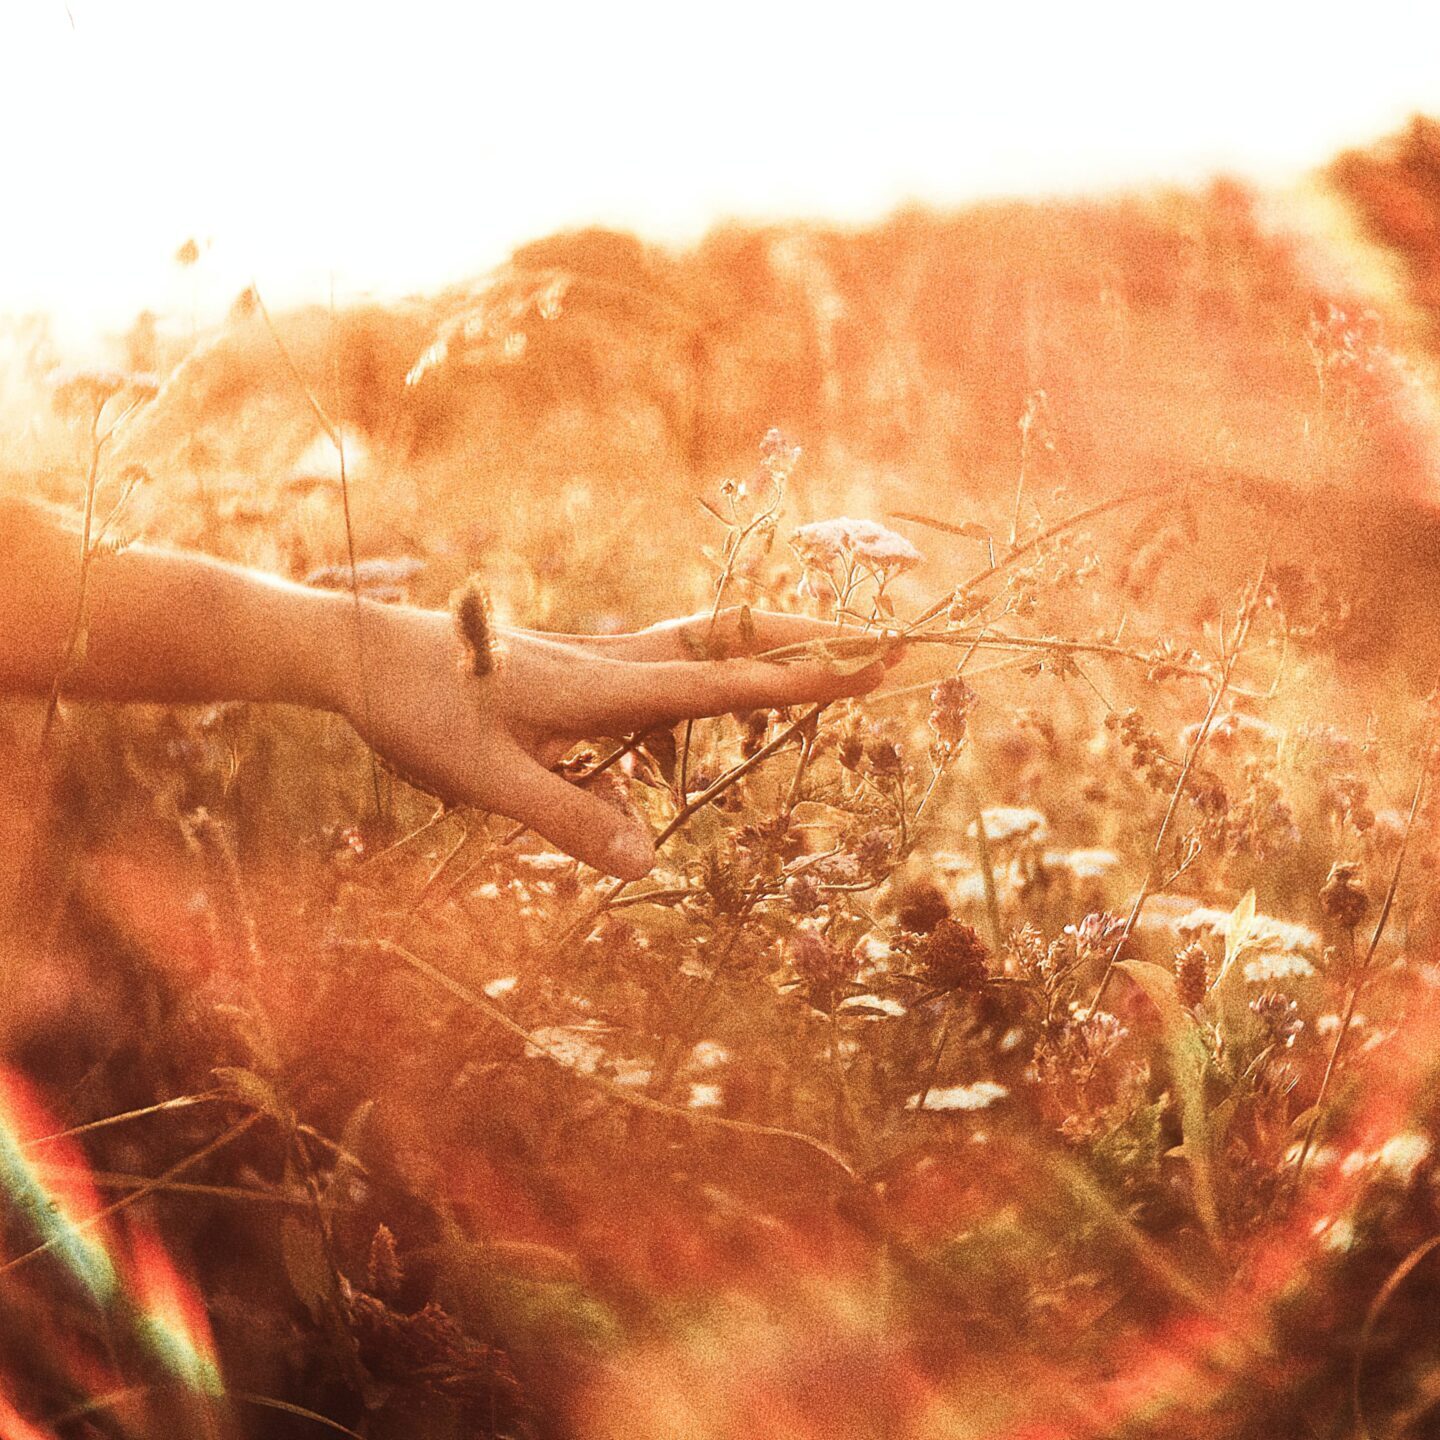 A hand reaching out in a field to touch growing plants, with the sun shining in the sky.